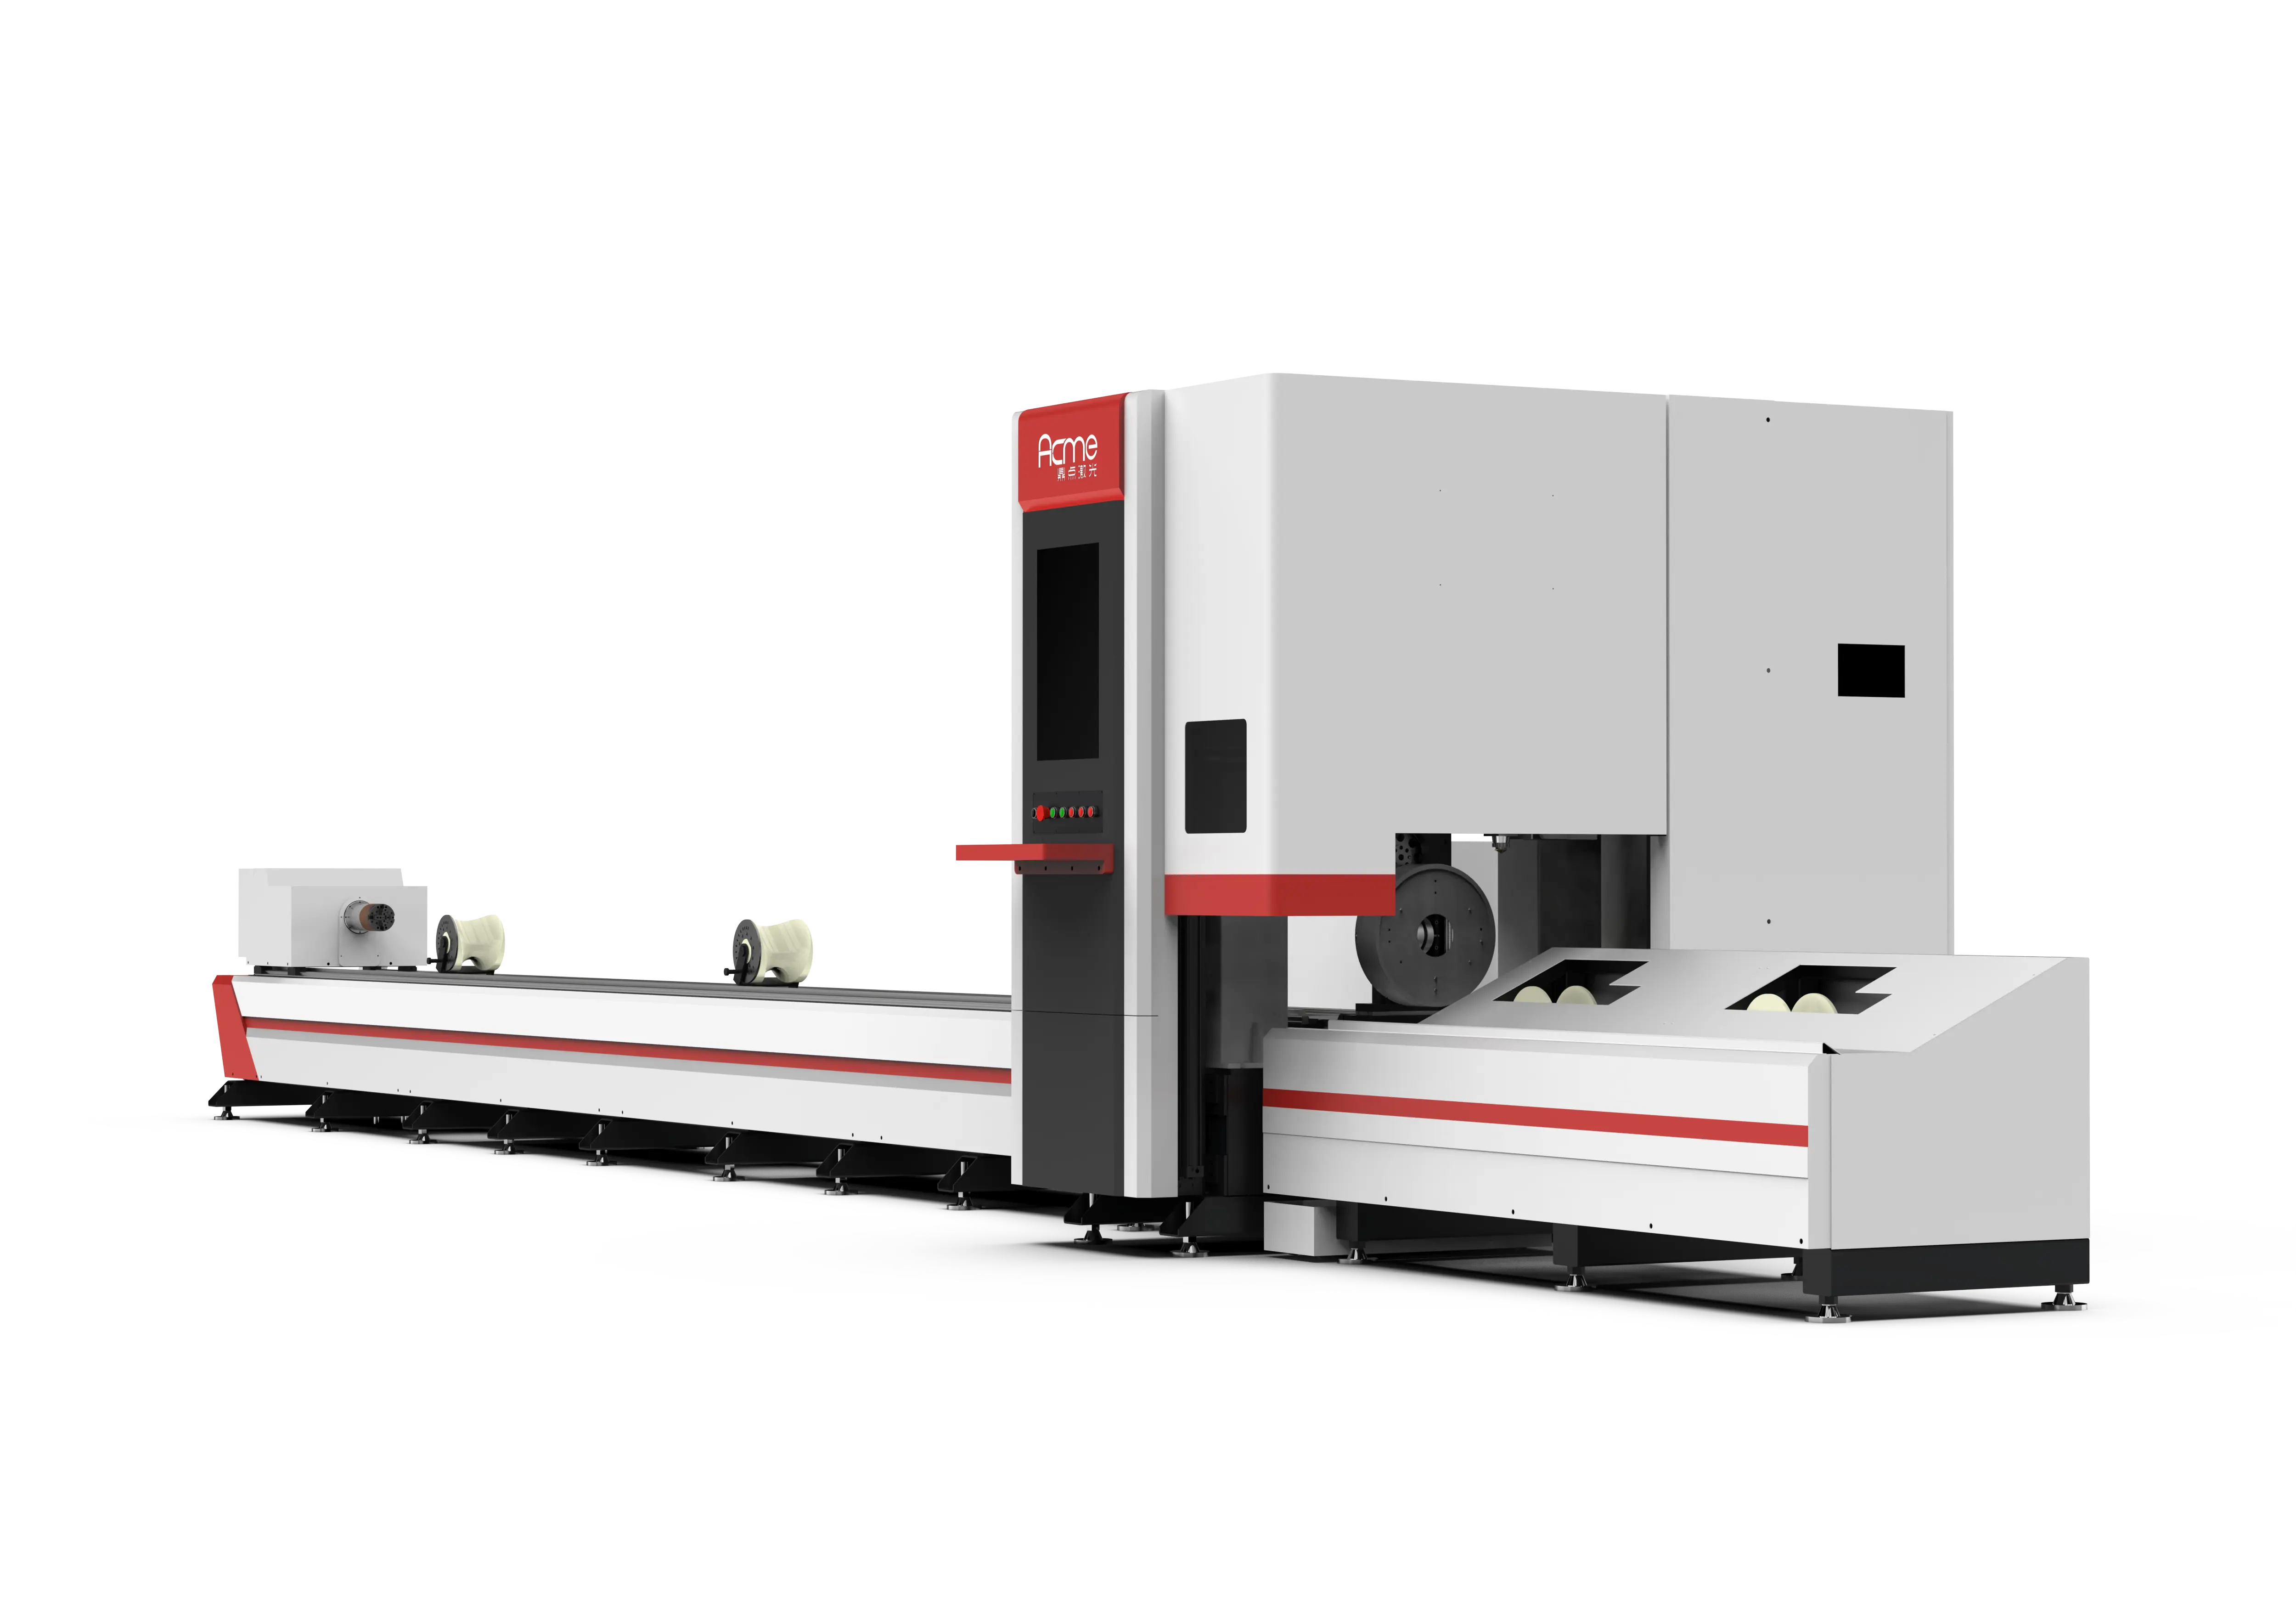 LASER CUTTING MACHINE MAKES MACHINE PRODUCTION MORE EFFICIENT AND ECONOMICAL